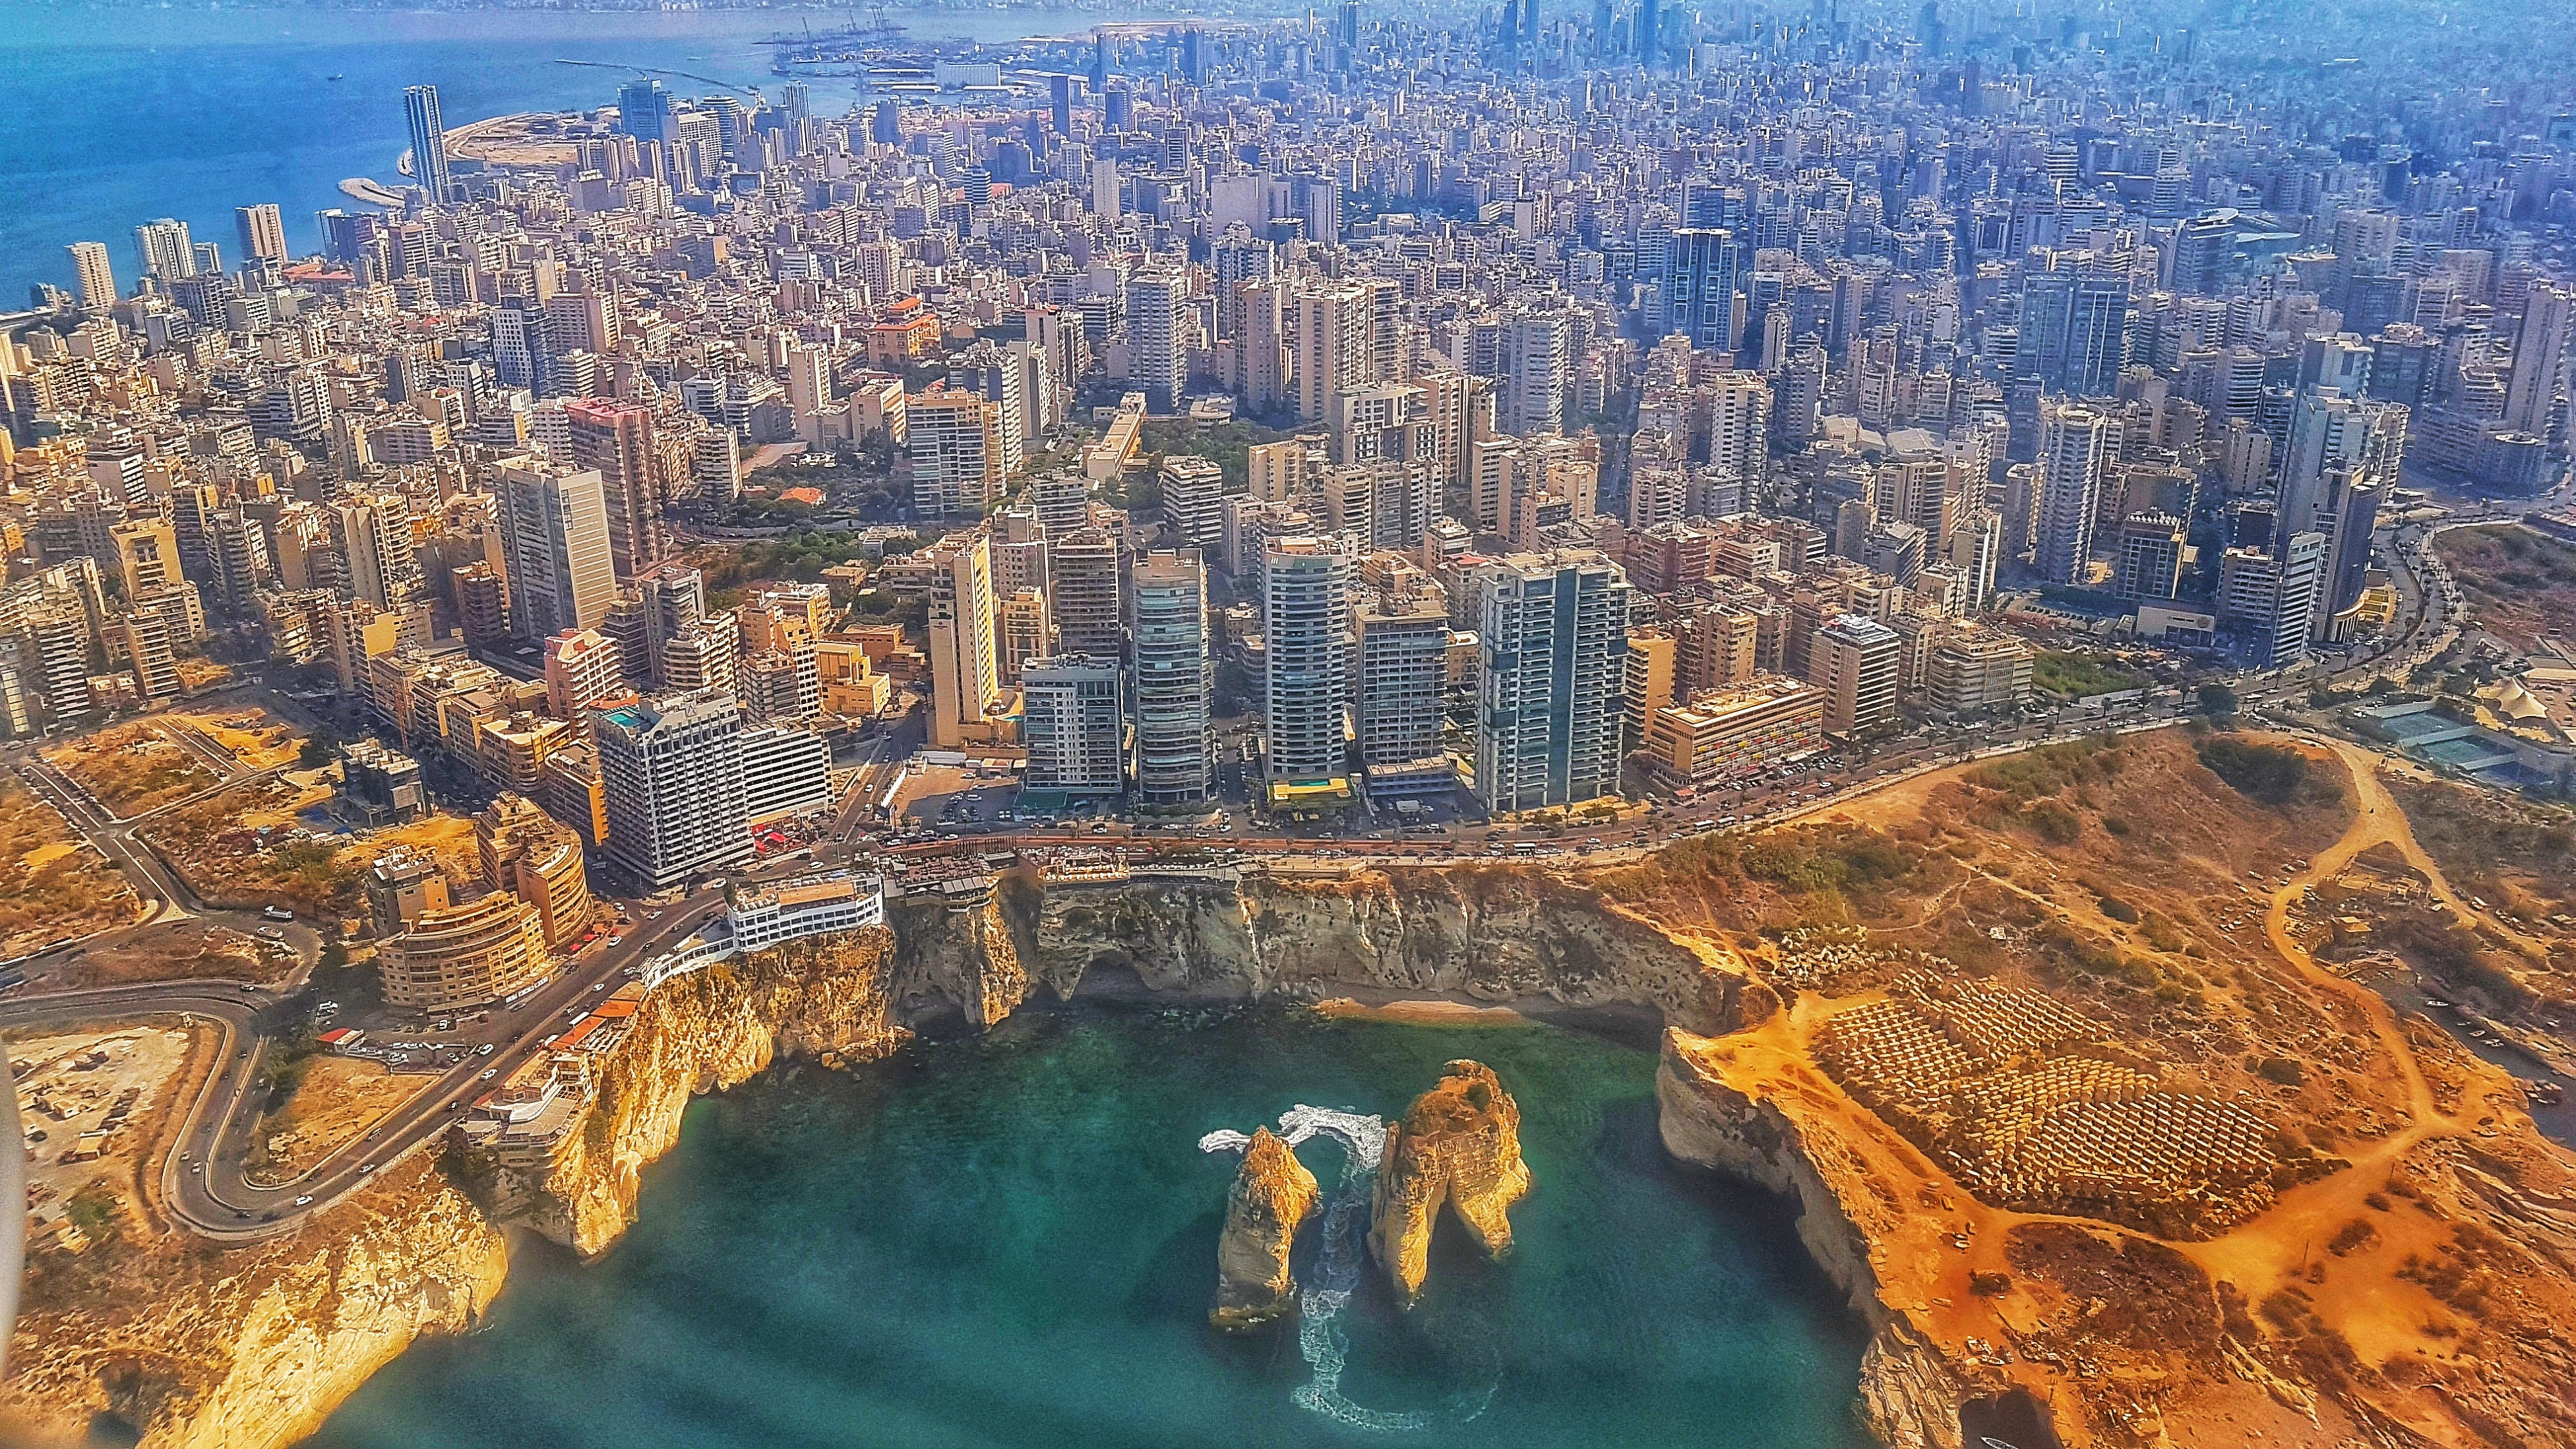 Beirut named in world’s top 15 cities by Travel + Leisure magazine!